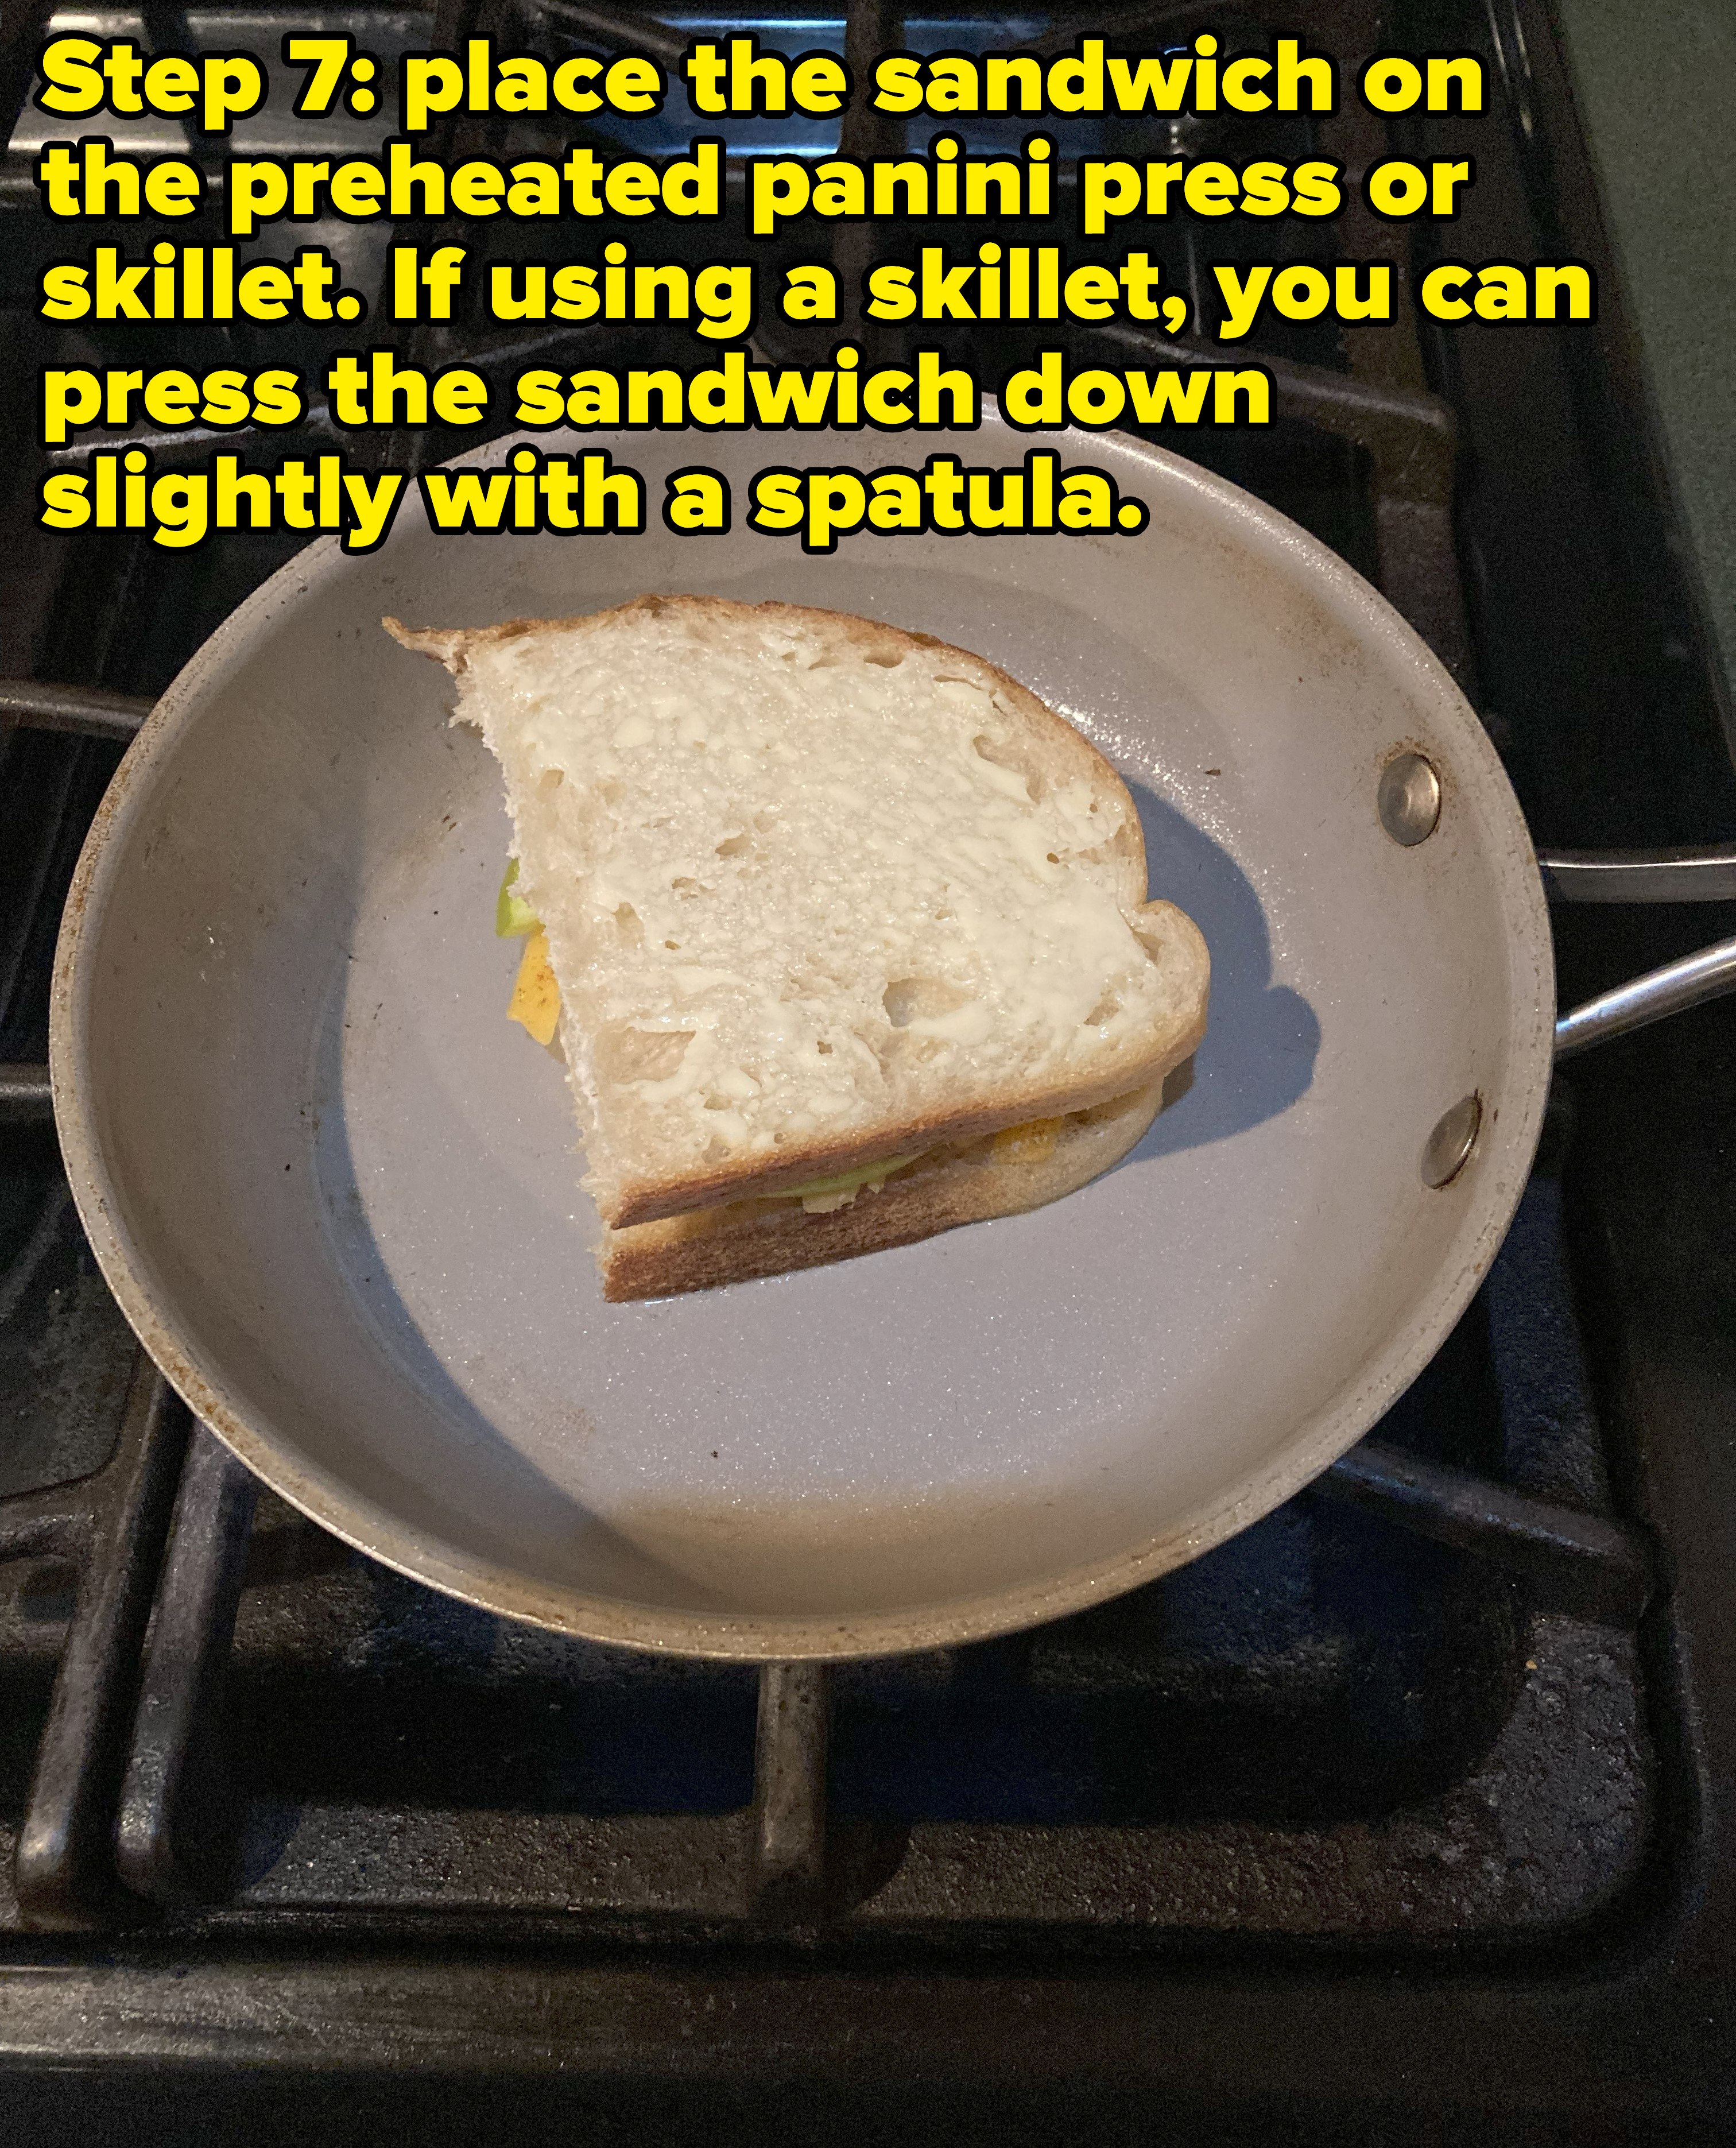 photo of step 7 with the the words &quot;place the sandwich on the preheated panini press or skillet, if using a skillet, use can press the sandwich down slightly with a spatula&quot;